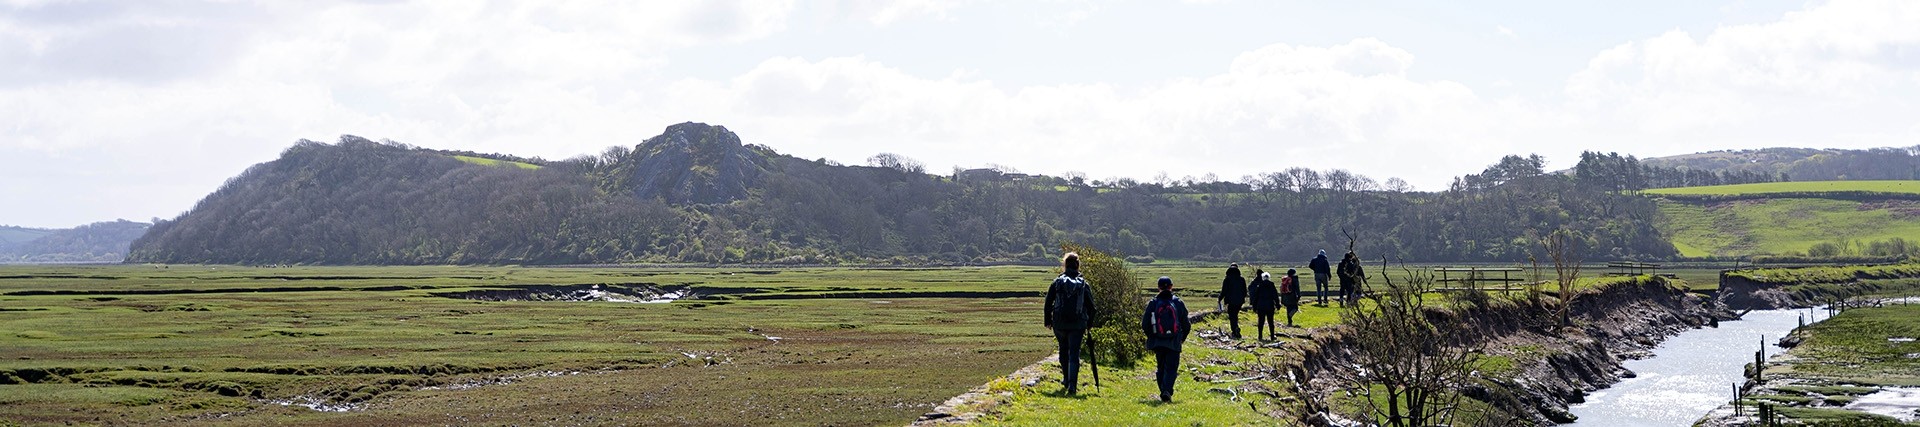 Seven people walk along a dyke with hills in front of them, a stream on their right and an area of tidal marshland on their left.